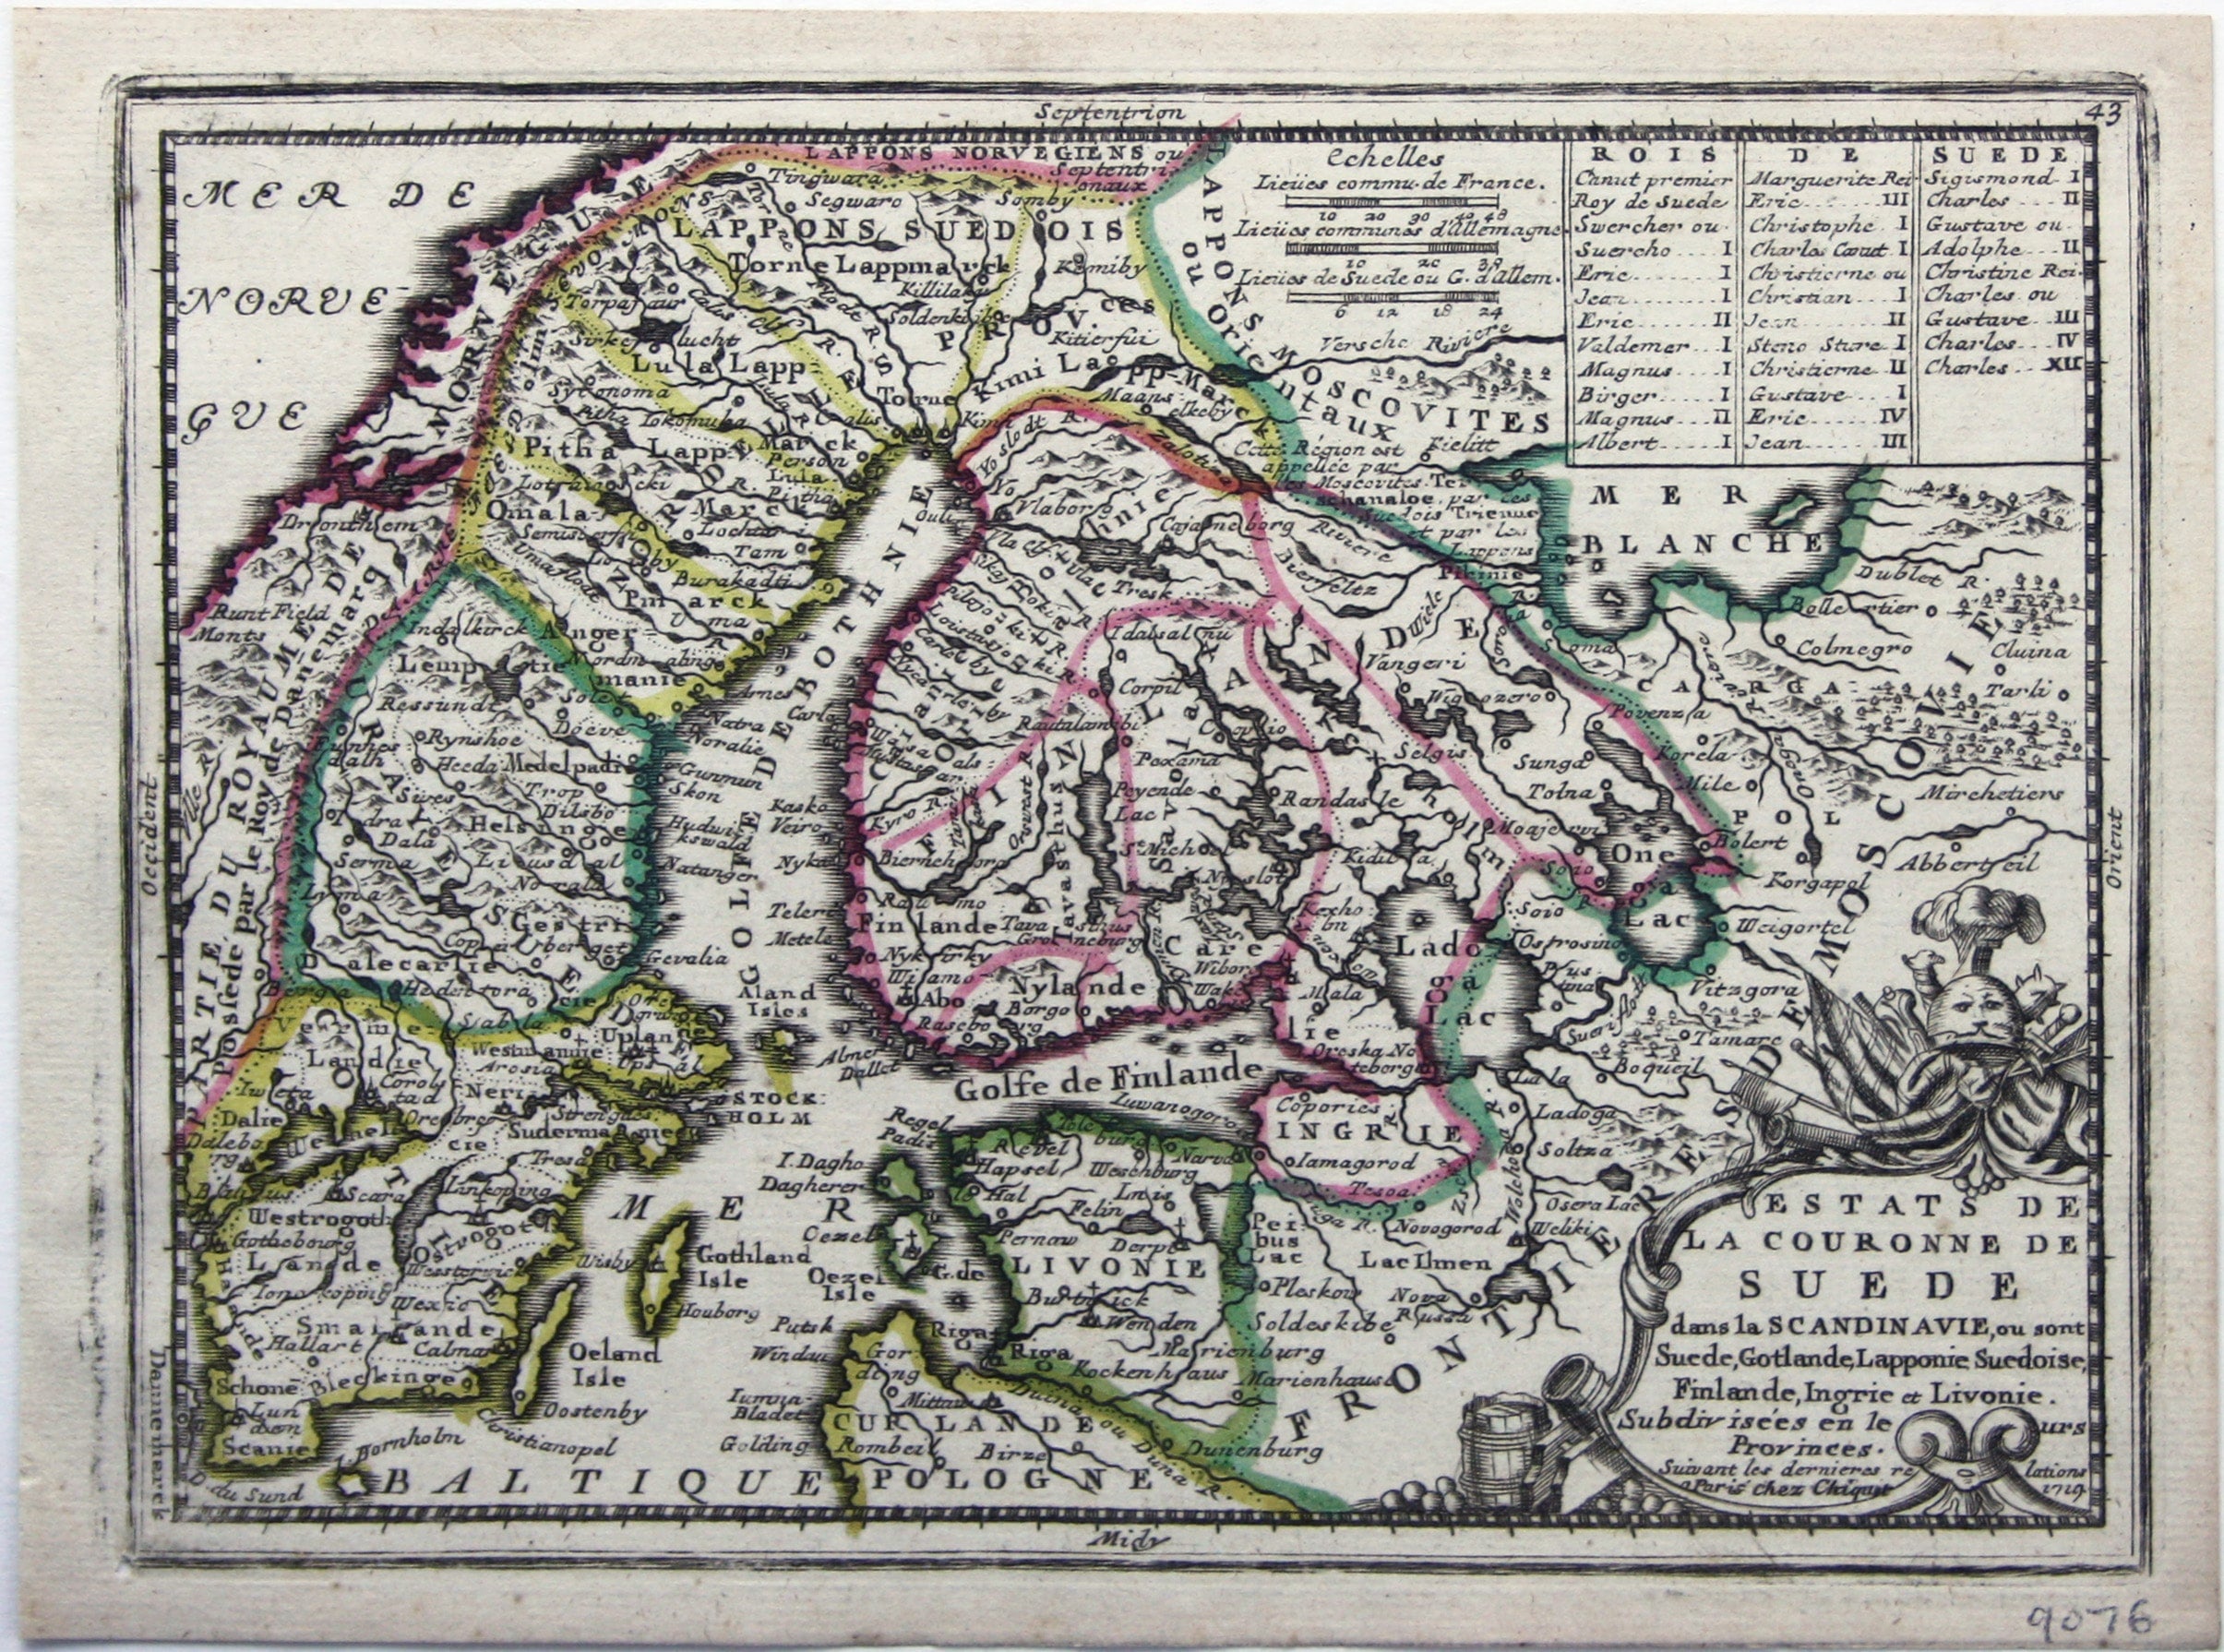 Chiquet’s Map of Sweden